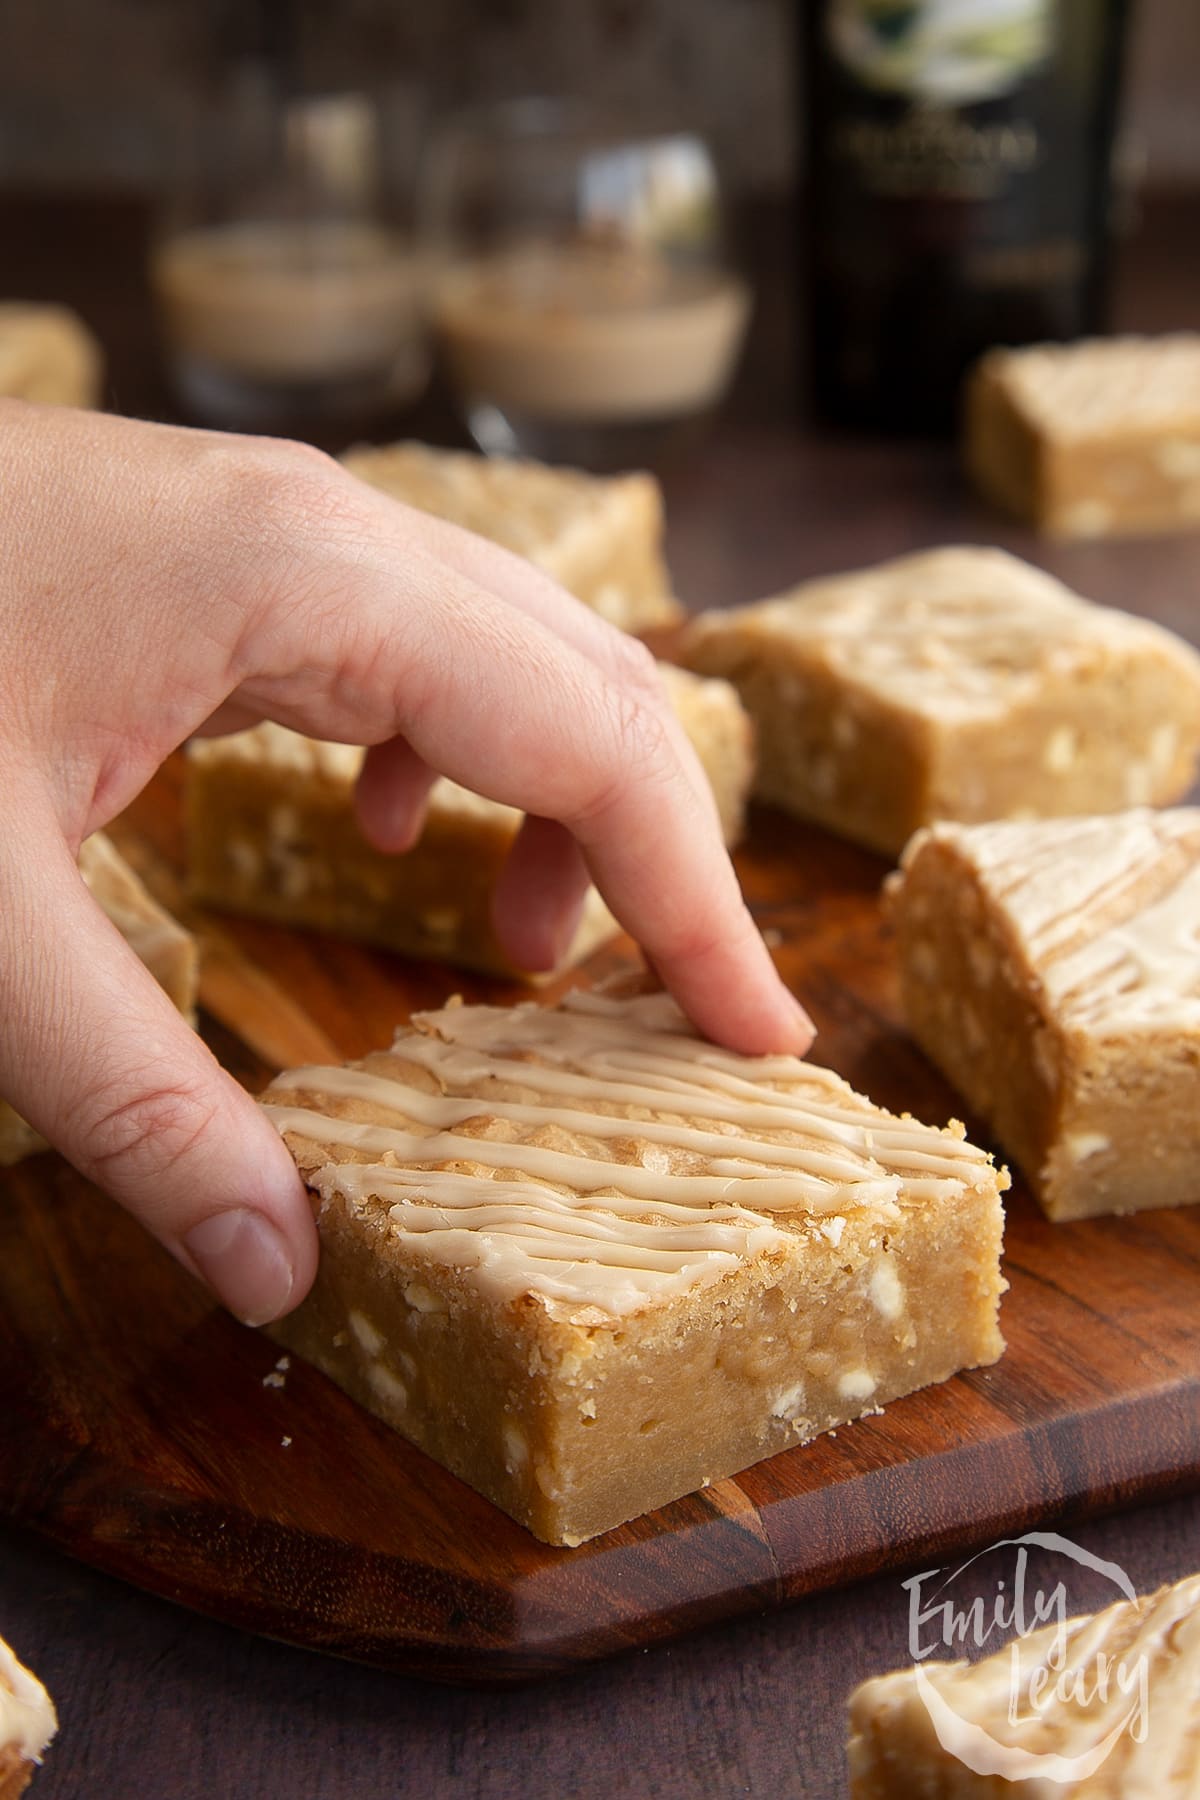 Baileys blondies on a wooden board. A hand reaches for one.